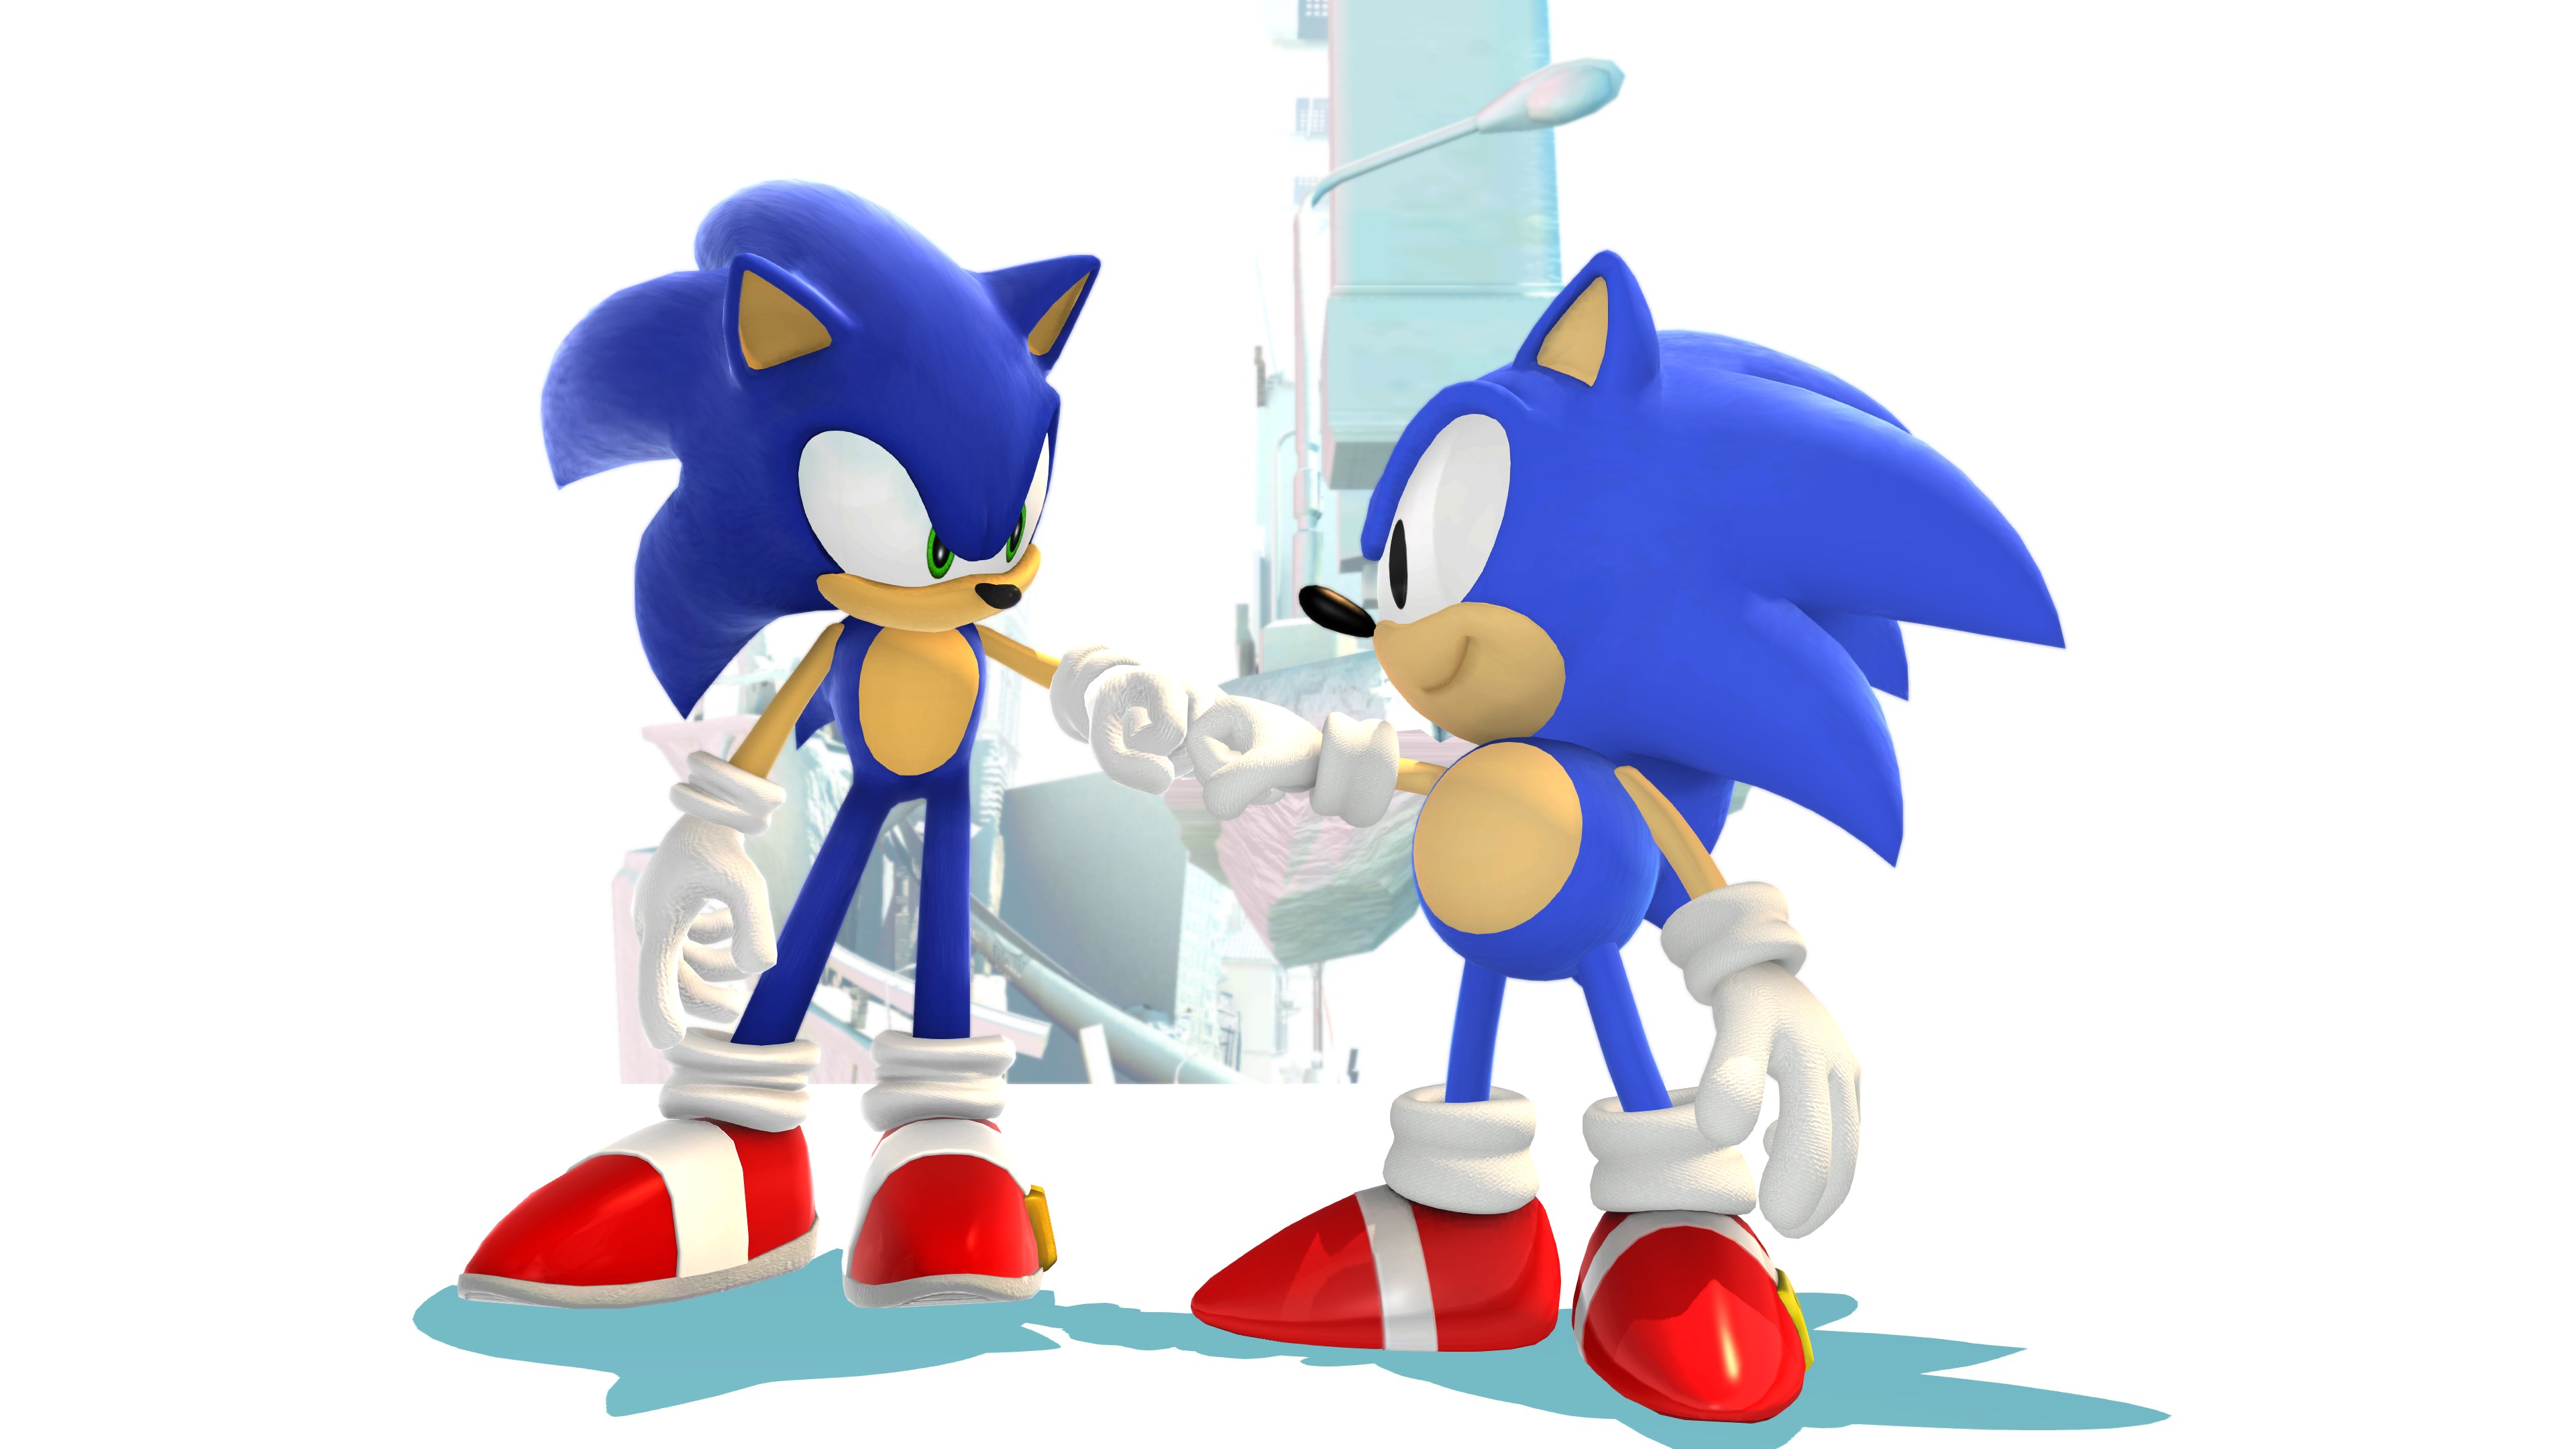 PS2 game Shadow the Hedgehog is reborn in Sonic Generations on PS5